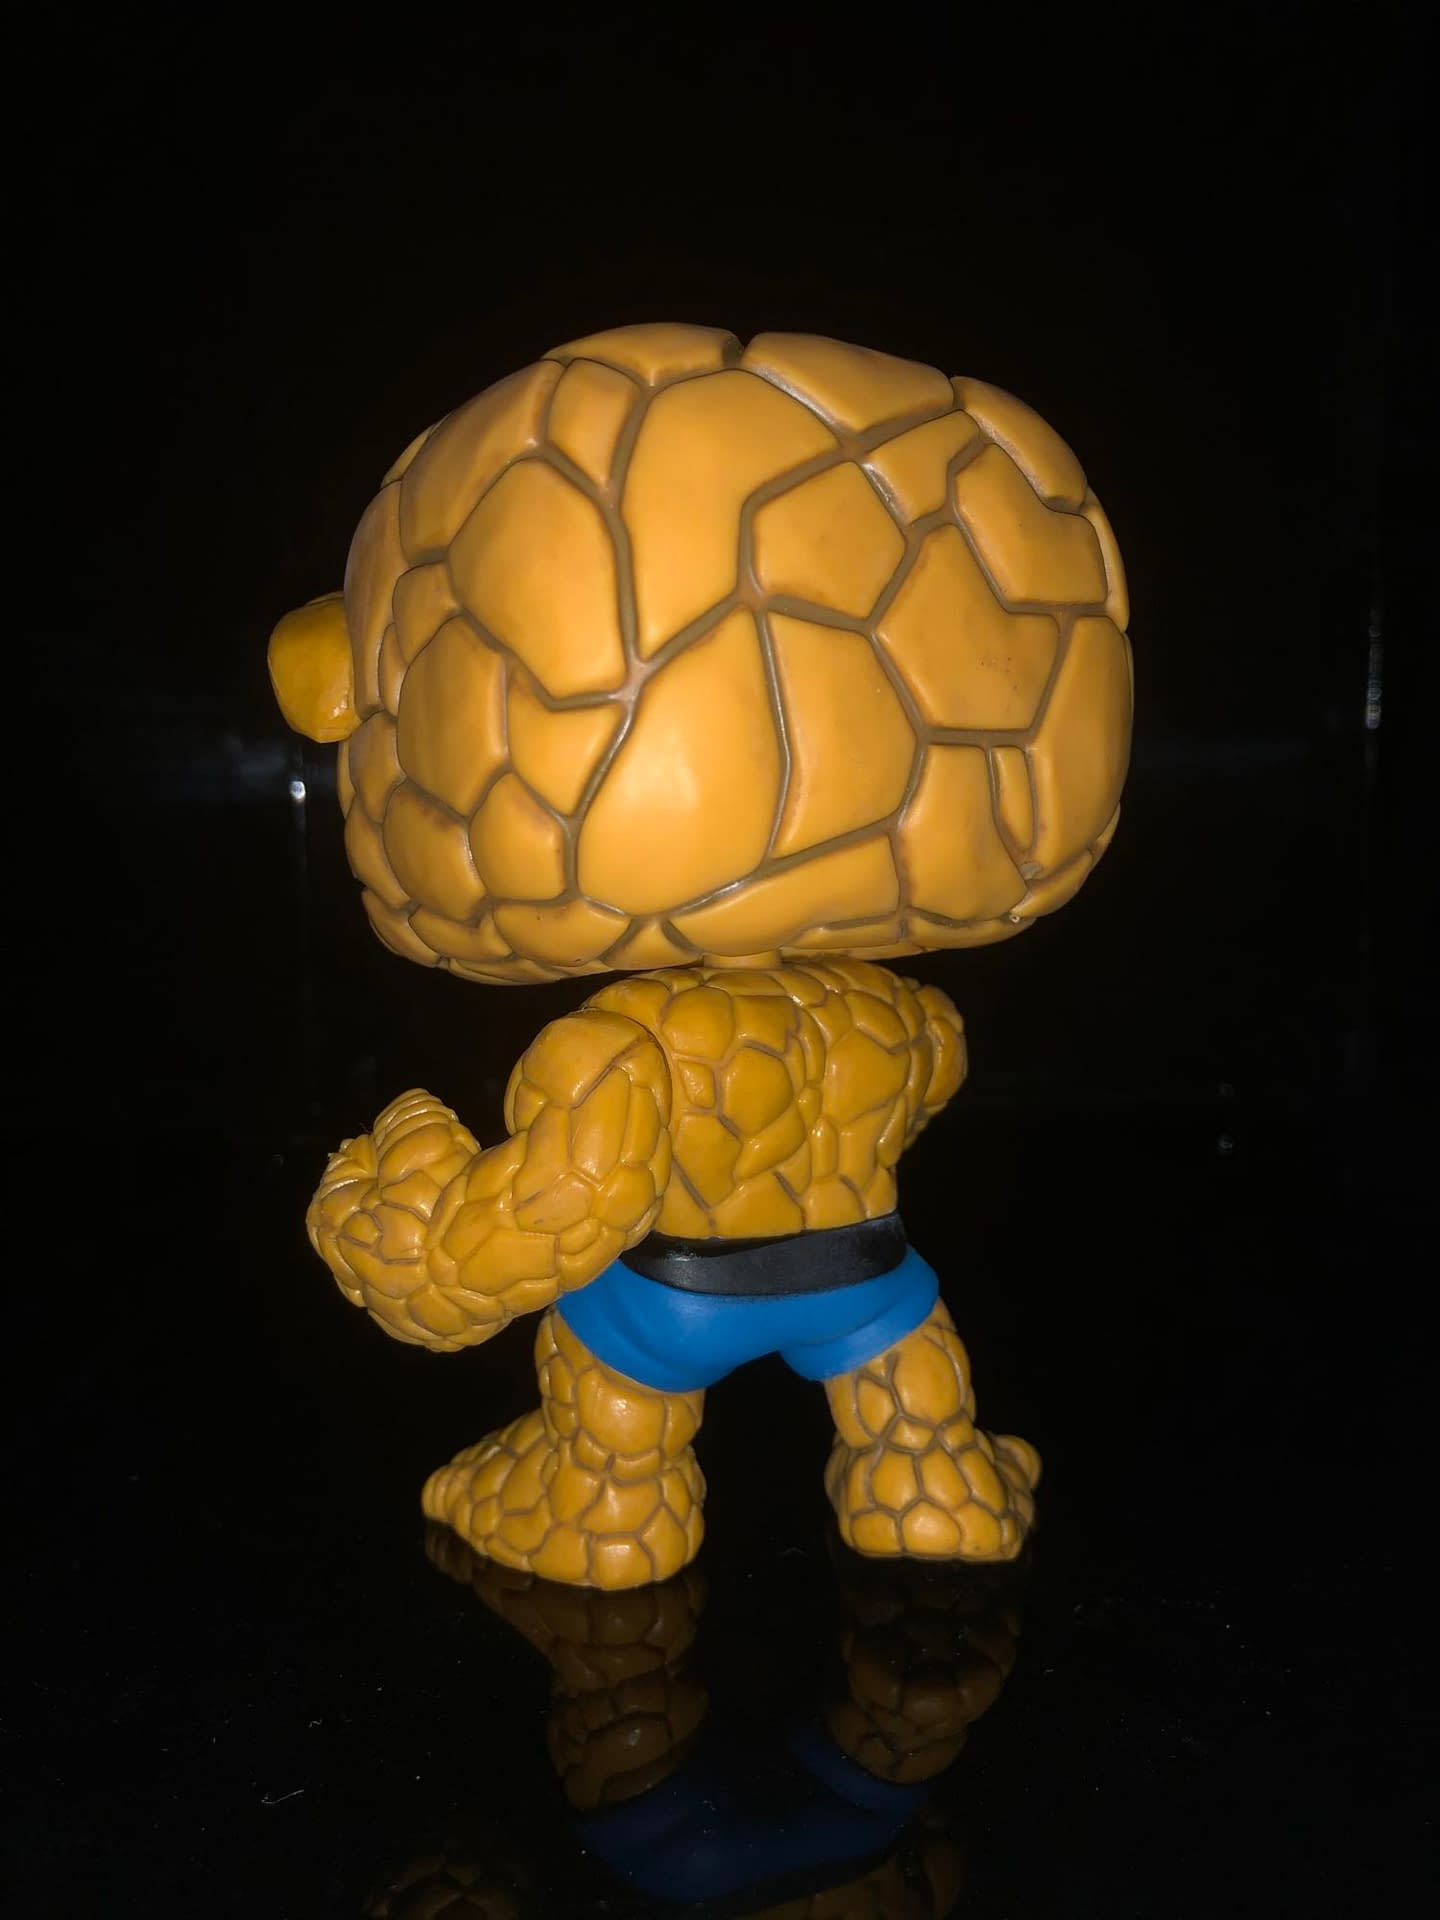 The Fantastic Four Have Finally Arrived from Funko [Review]